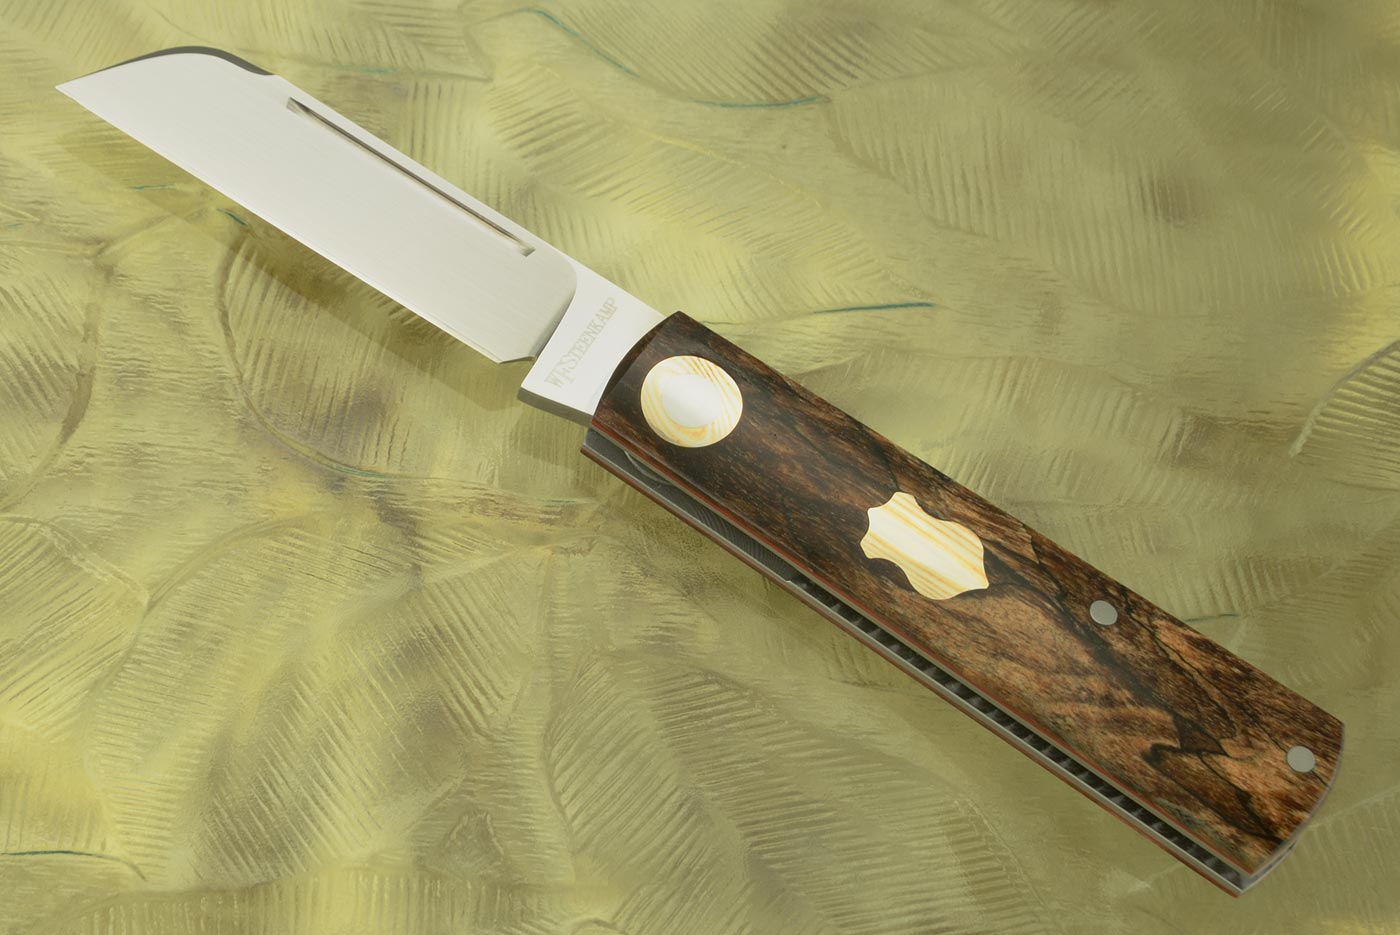 Barlow Slipjoint with Spalted Maple Burl and Mokume